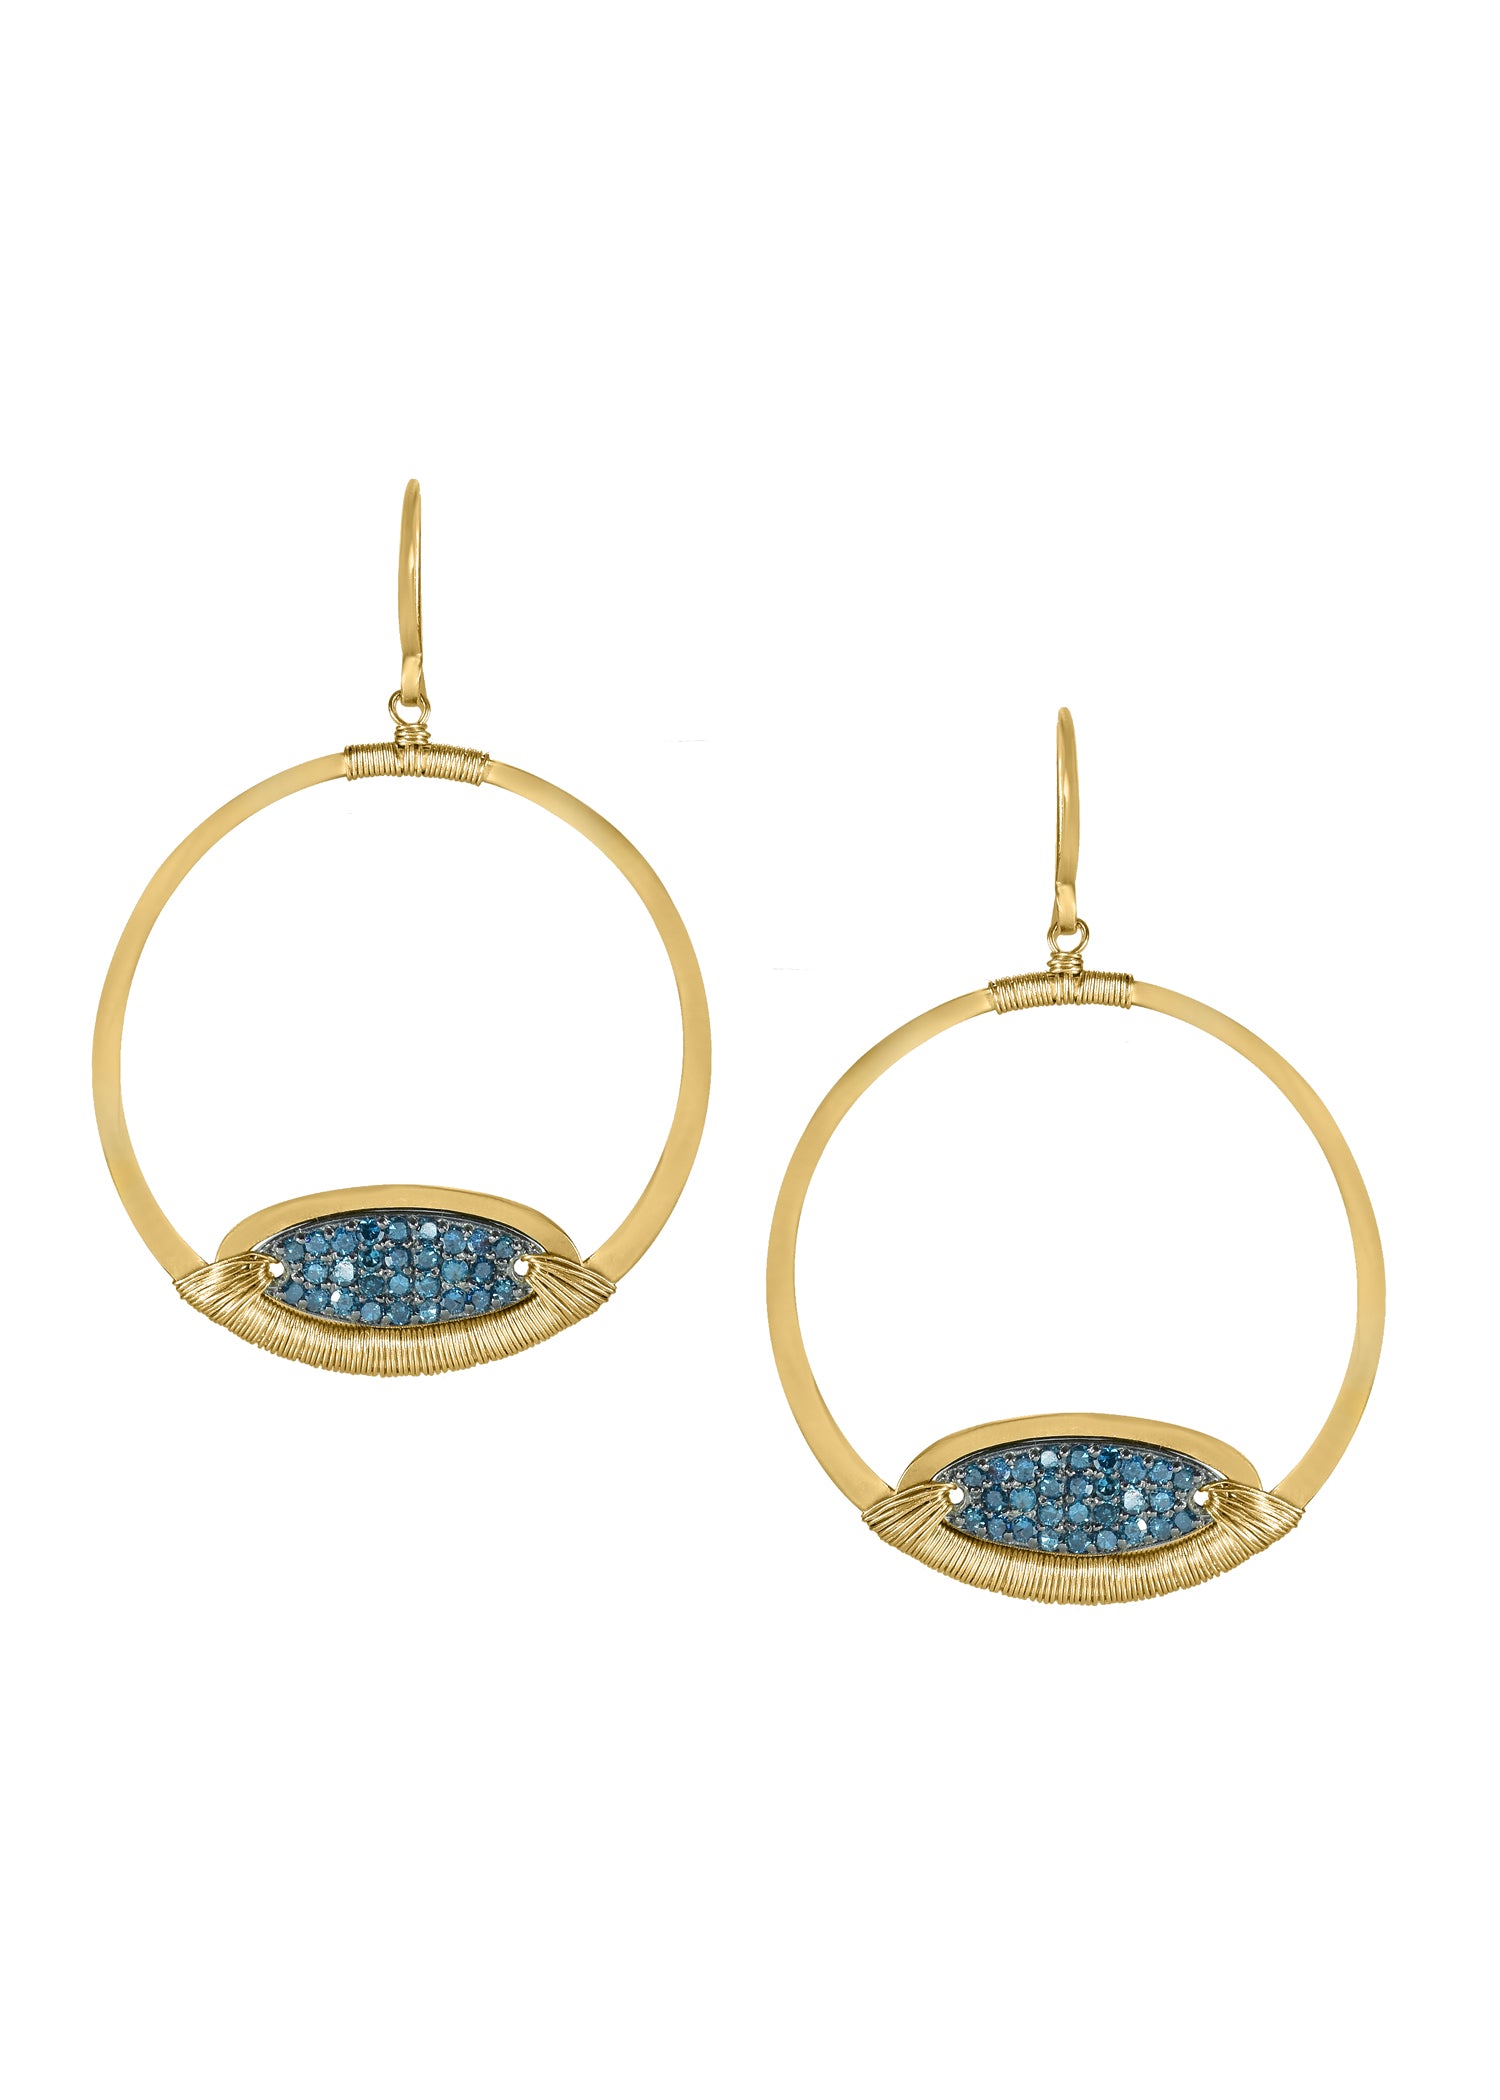 Blue diamond 14k gold Sterling silver Mixed metal Special order only Earrings measure 1-3/4" in length (including the ear wires) and 1 1/4" in width Handmade in our Los Angeles studio